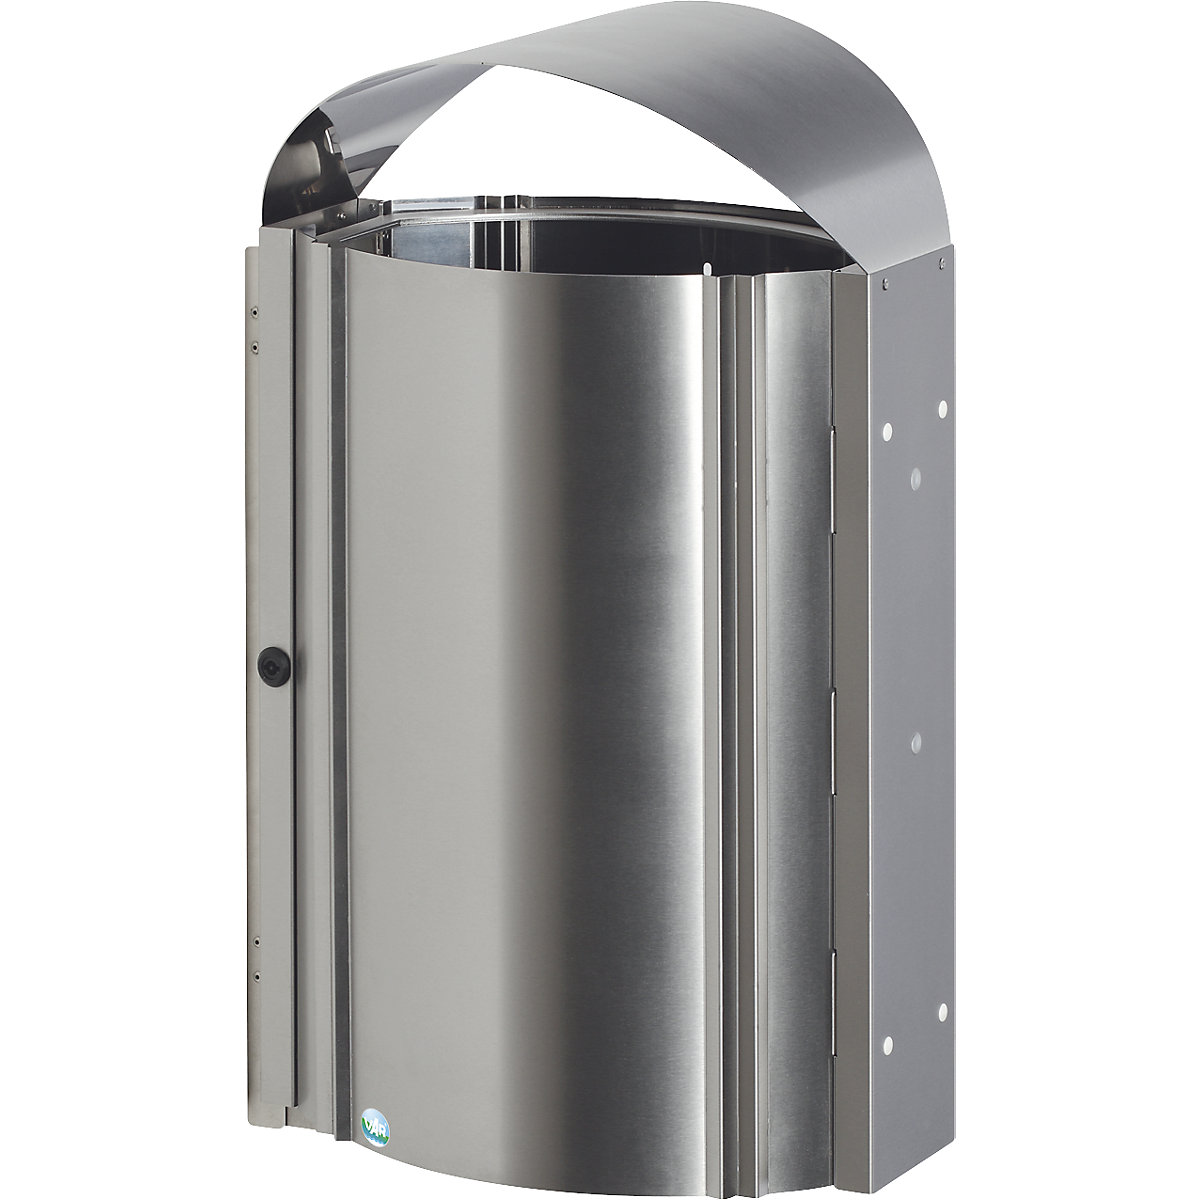 Stainless steel waste collector, outdoor areas - VAR